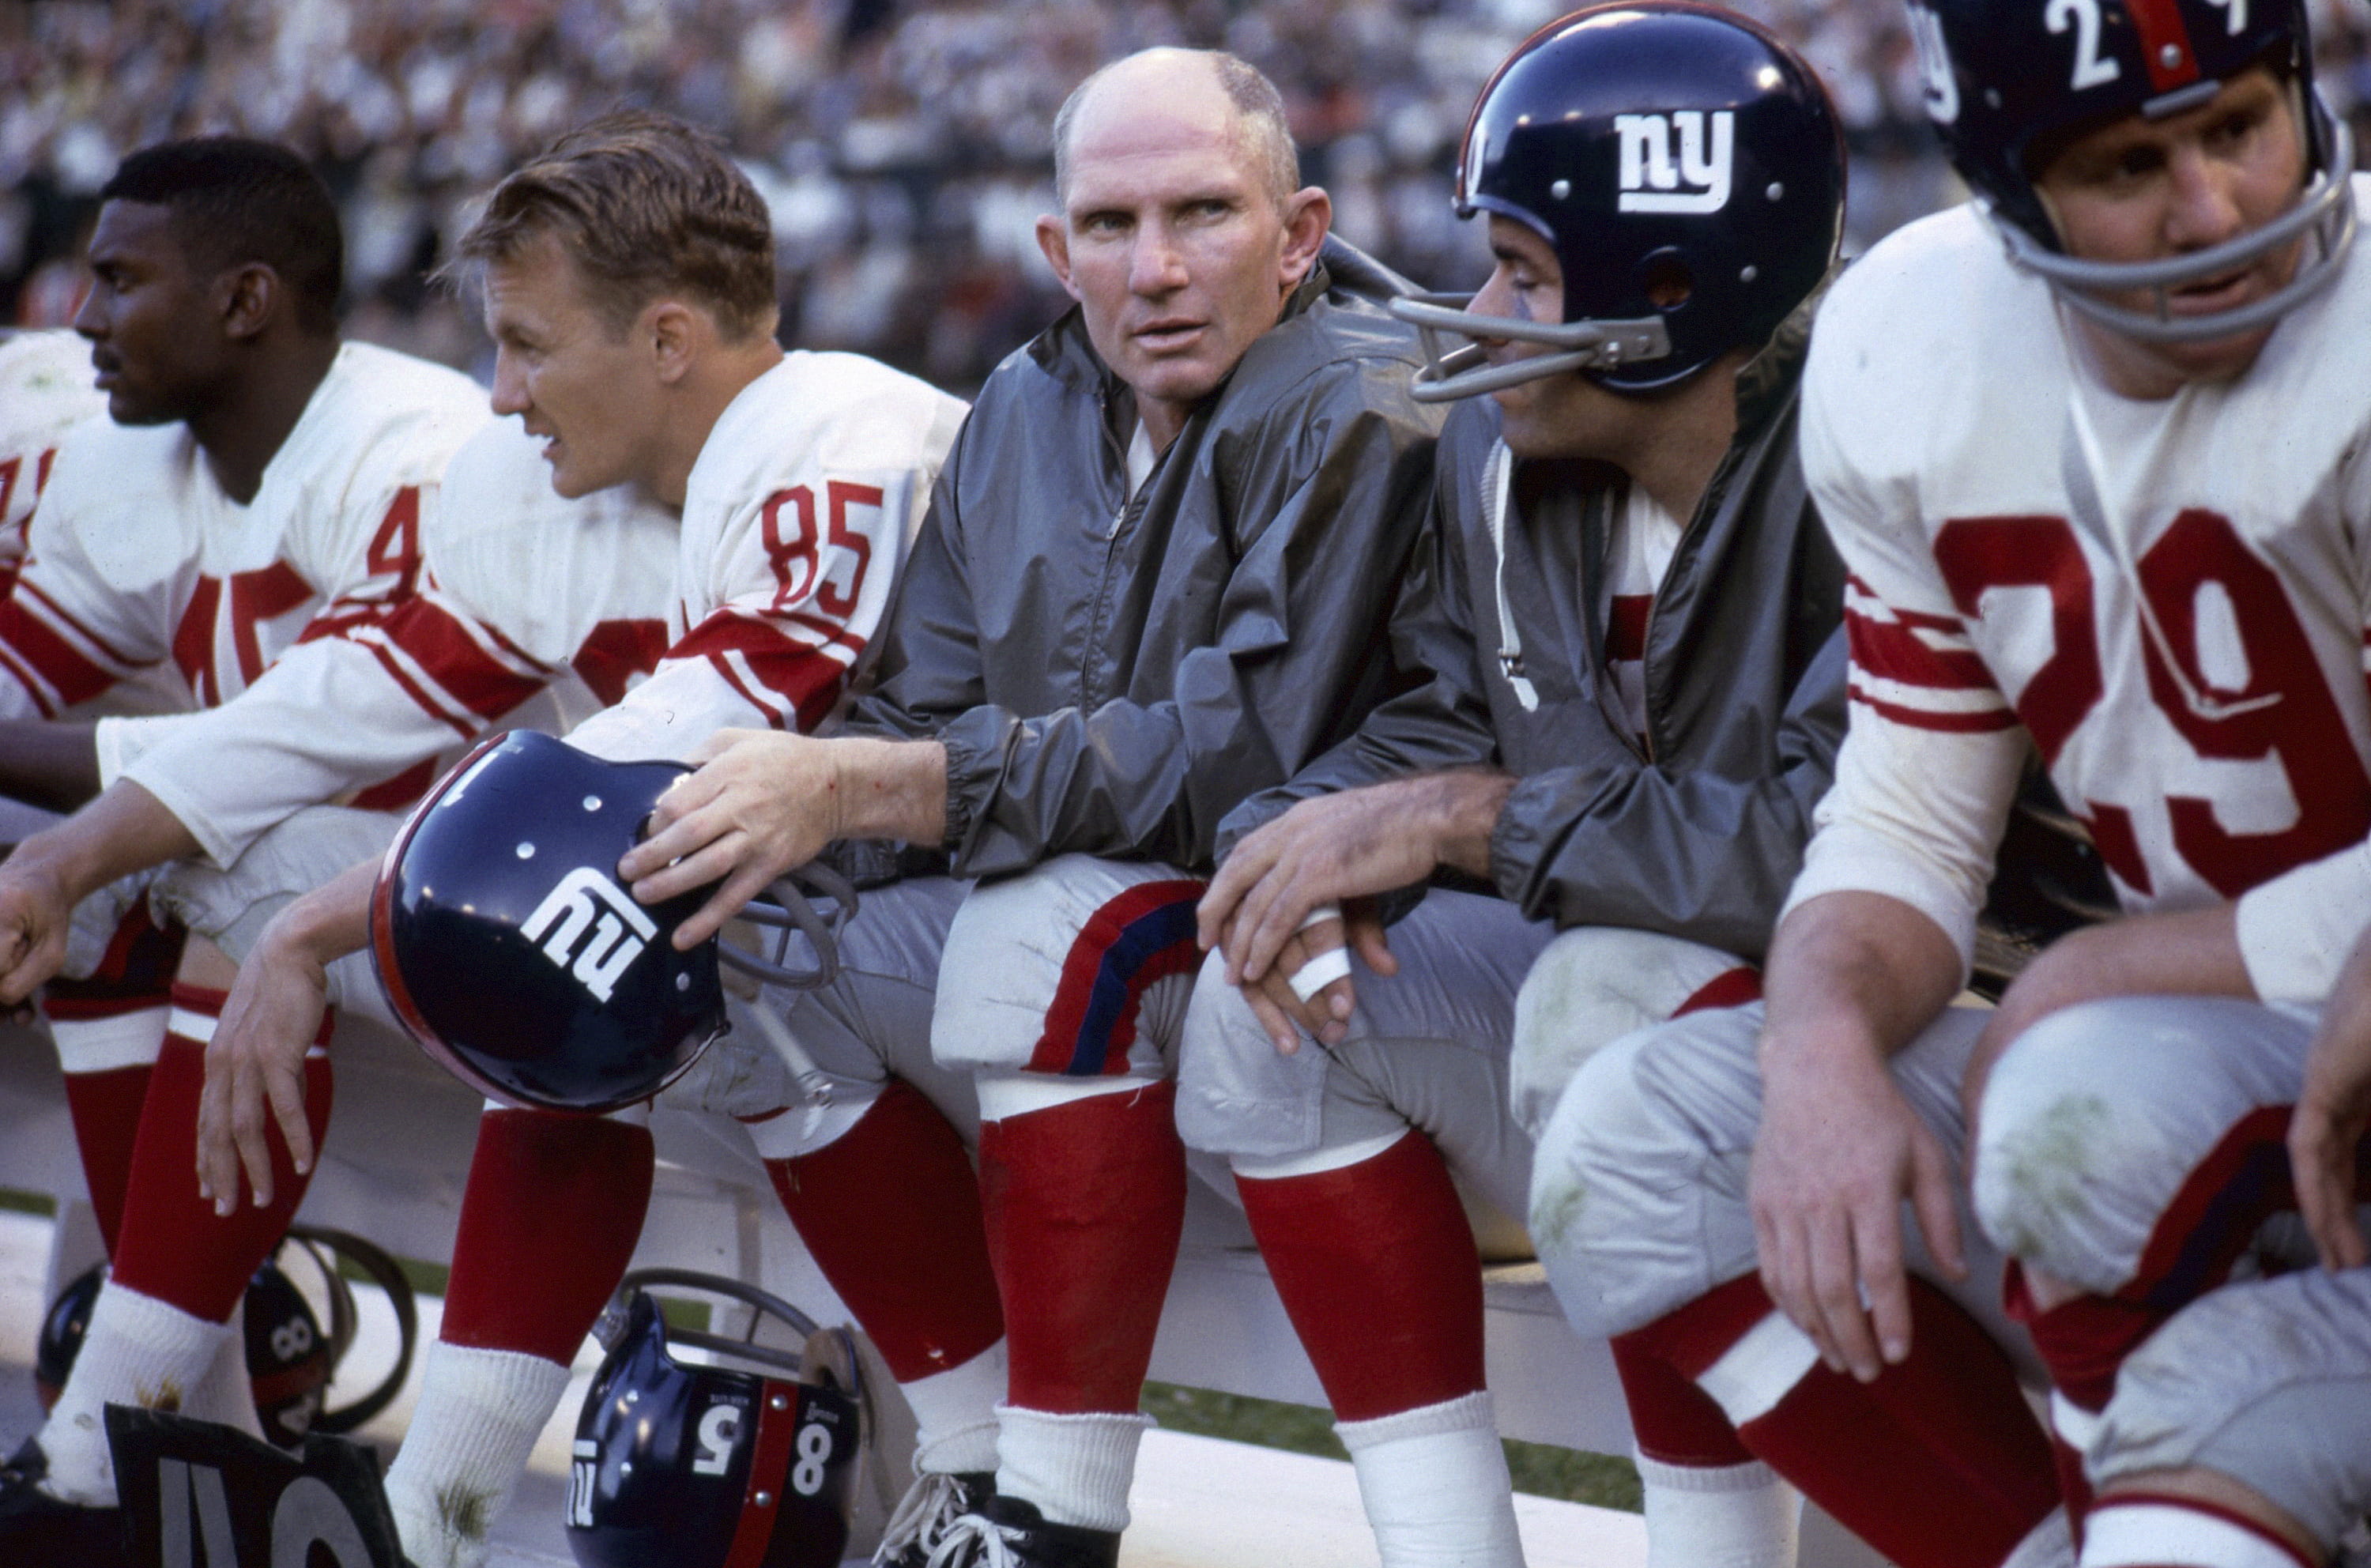 New York Giants quarterback Y.A. Tittle, center, sits on the bench with his teammates during a game in 1964.